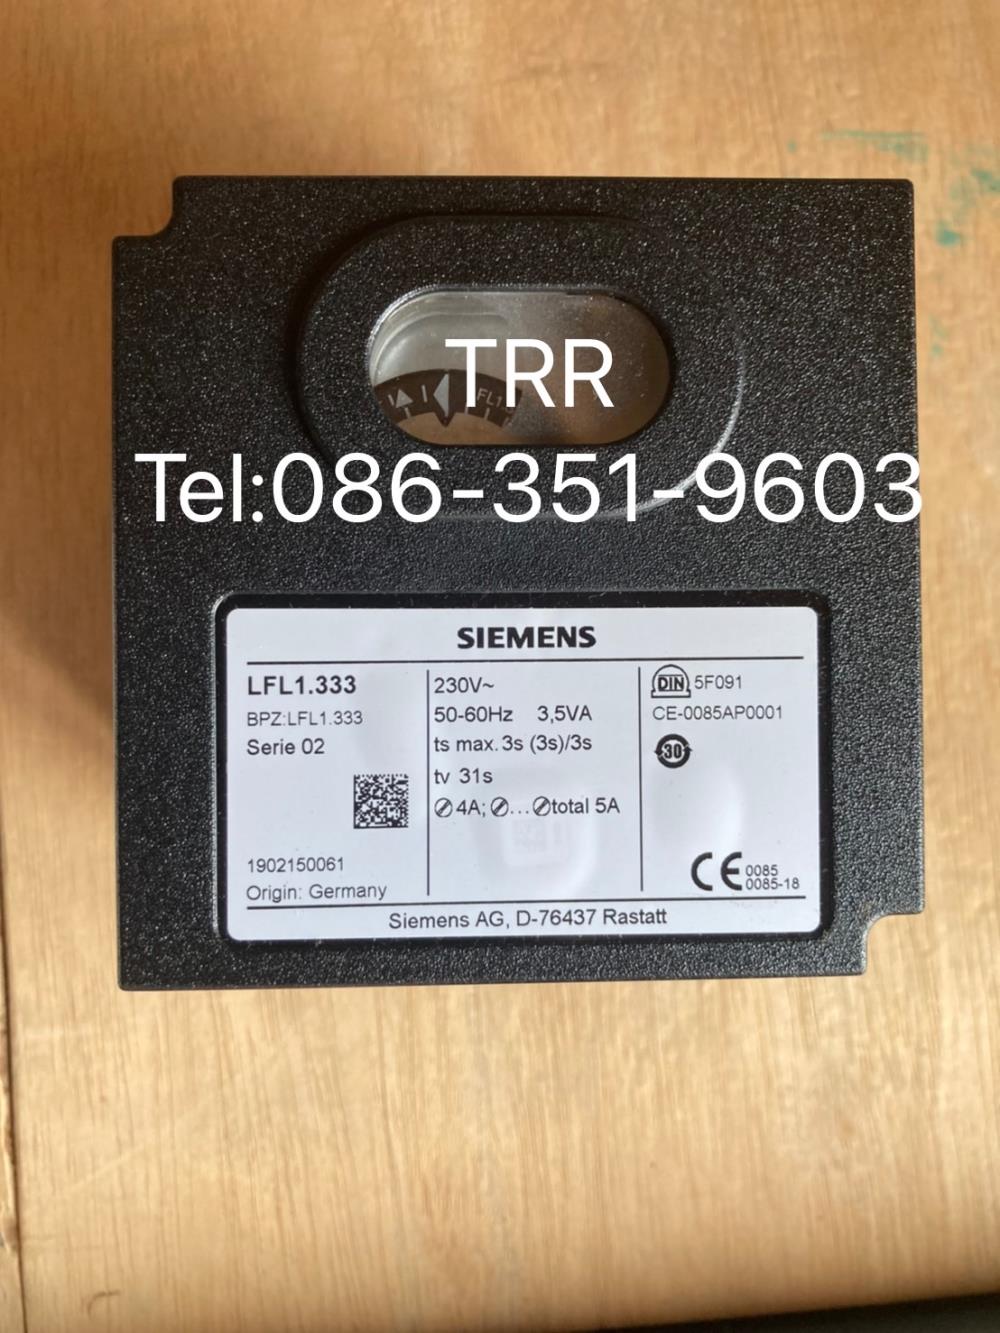 Siemens LFL1.333,Siemens LFL1.333,Siemens LFL1.333,Instruments and Controls/Controllers